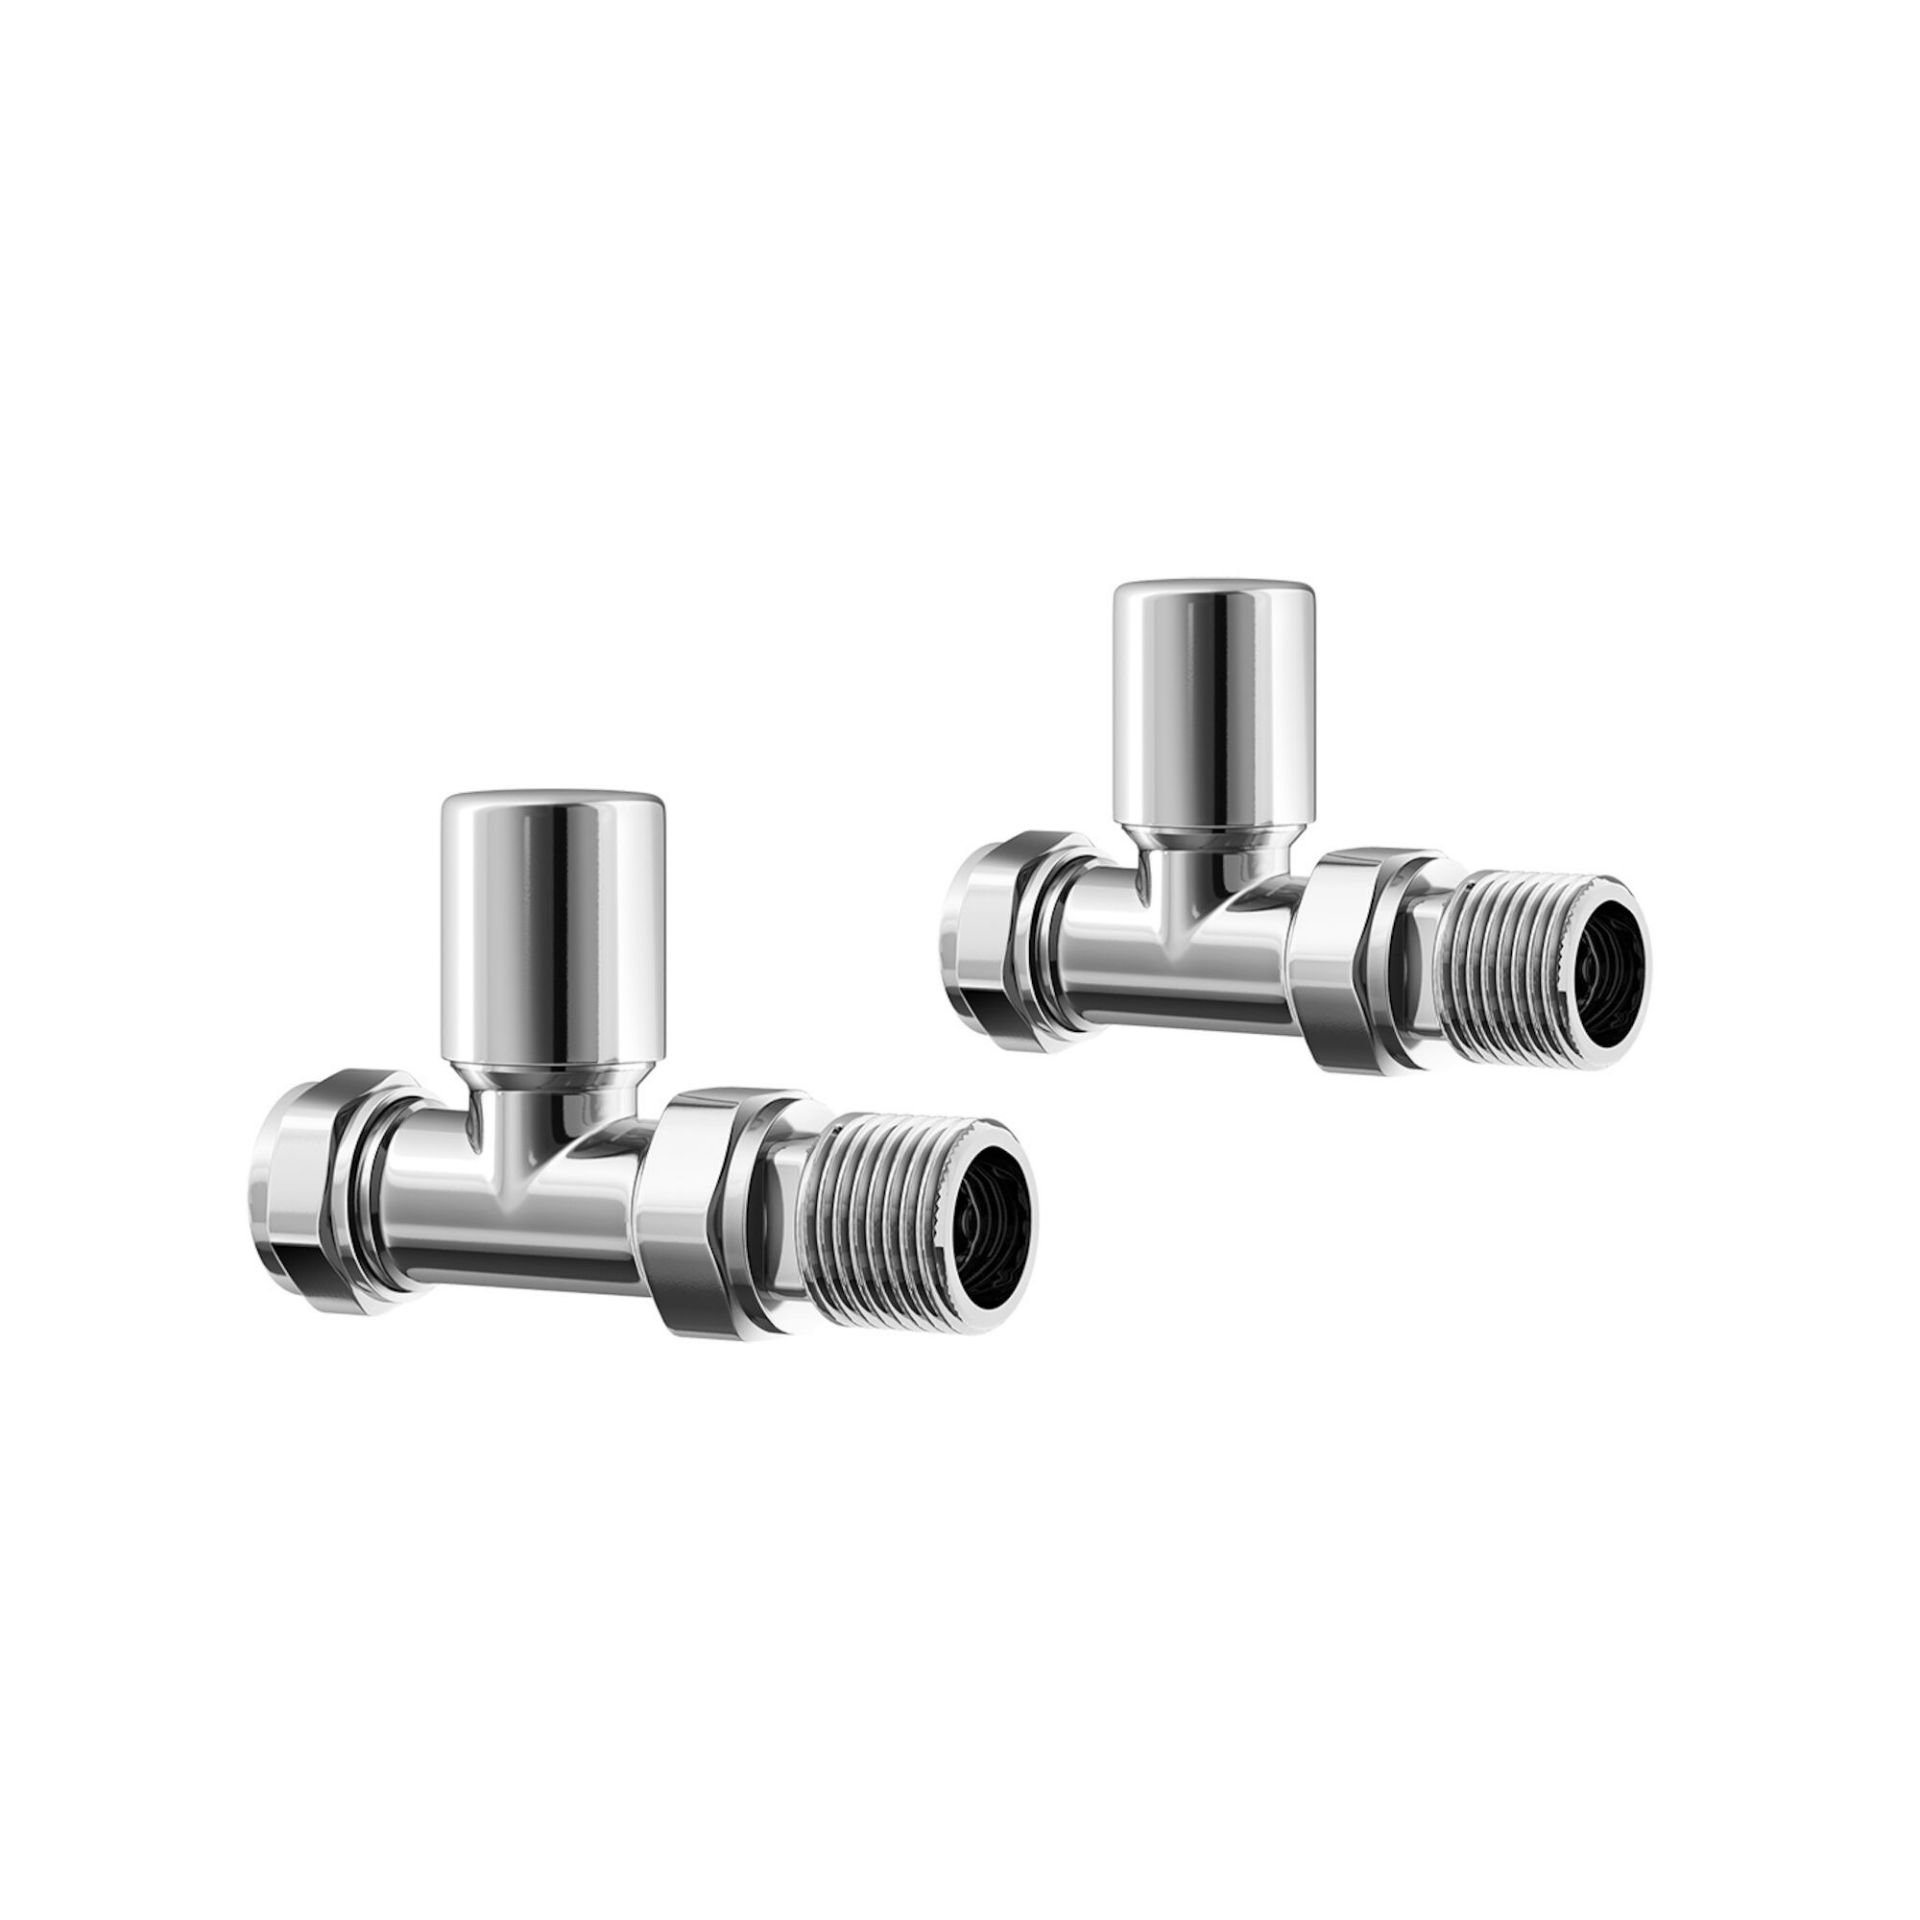 (LX22) Standard 15mm Connection Straight Chrome Radiator Valves Chrome Plated Solid Brass Straight